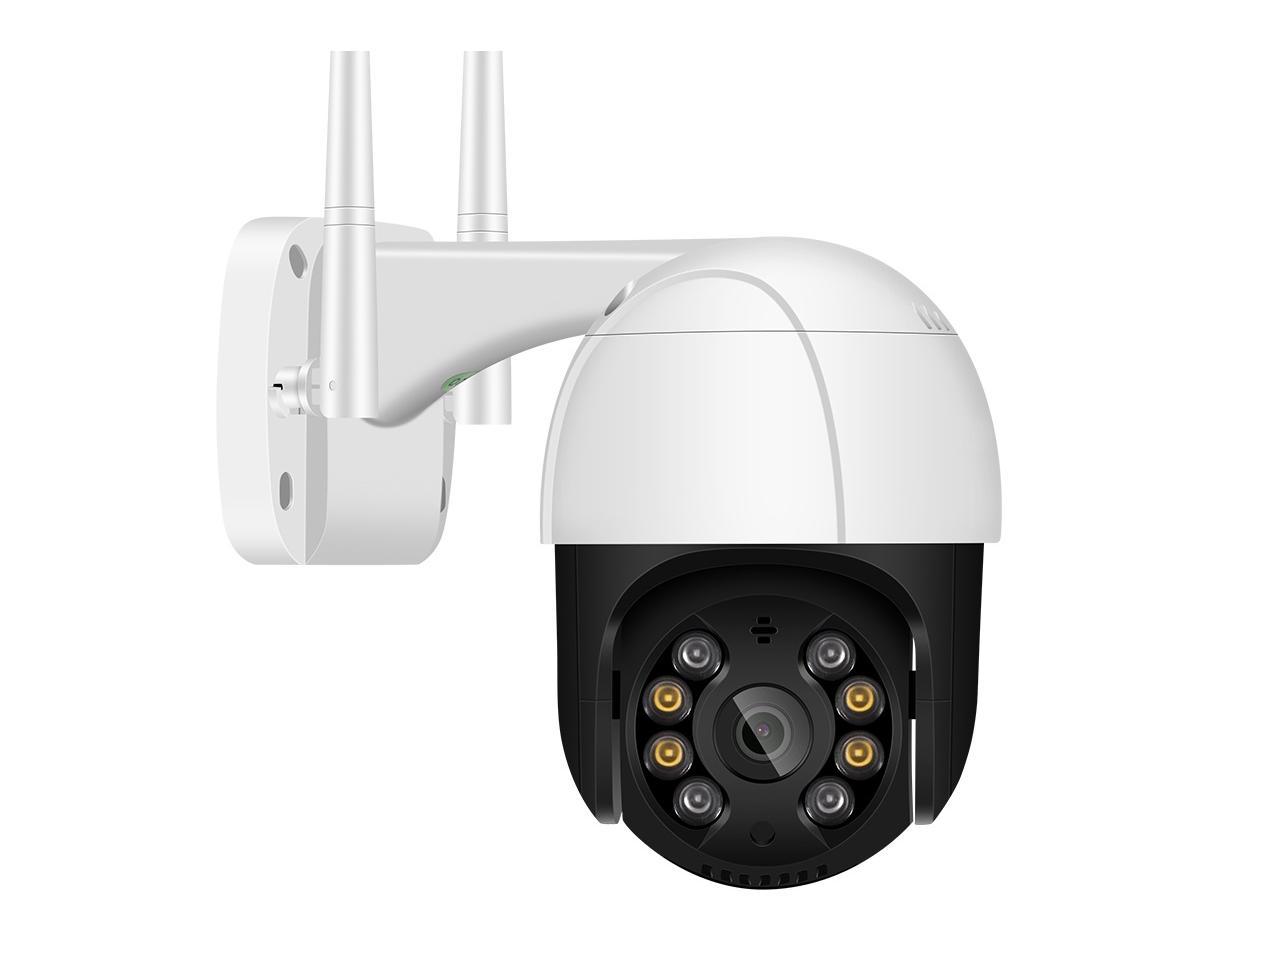 Security camera WiFi IP PTZ HD 1080P 5MP Outdoor IP66 4x dig. zoom 